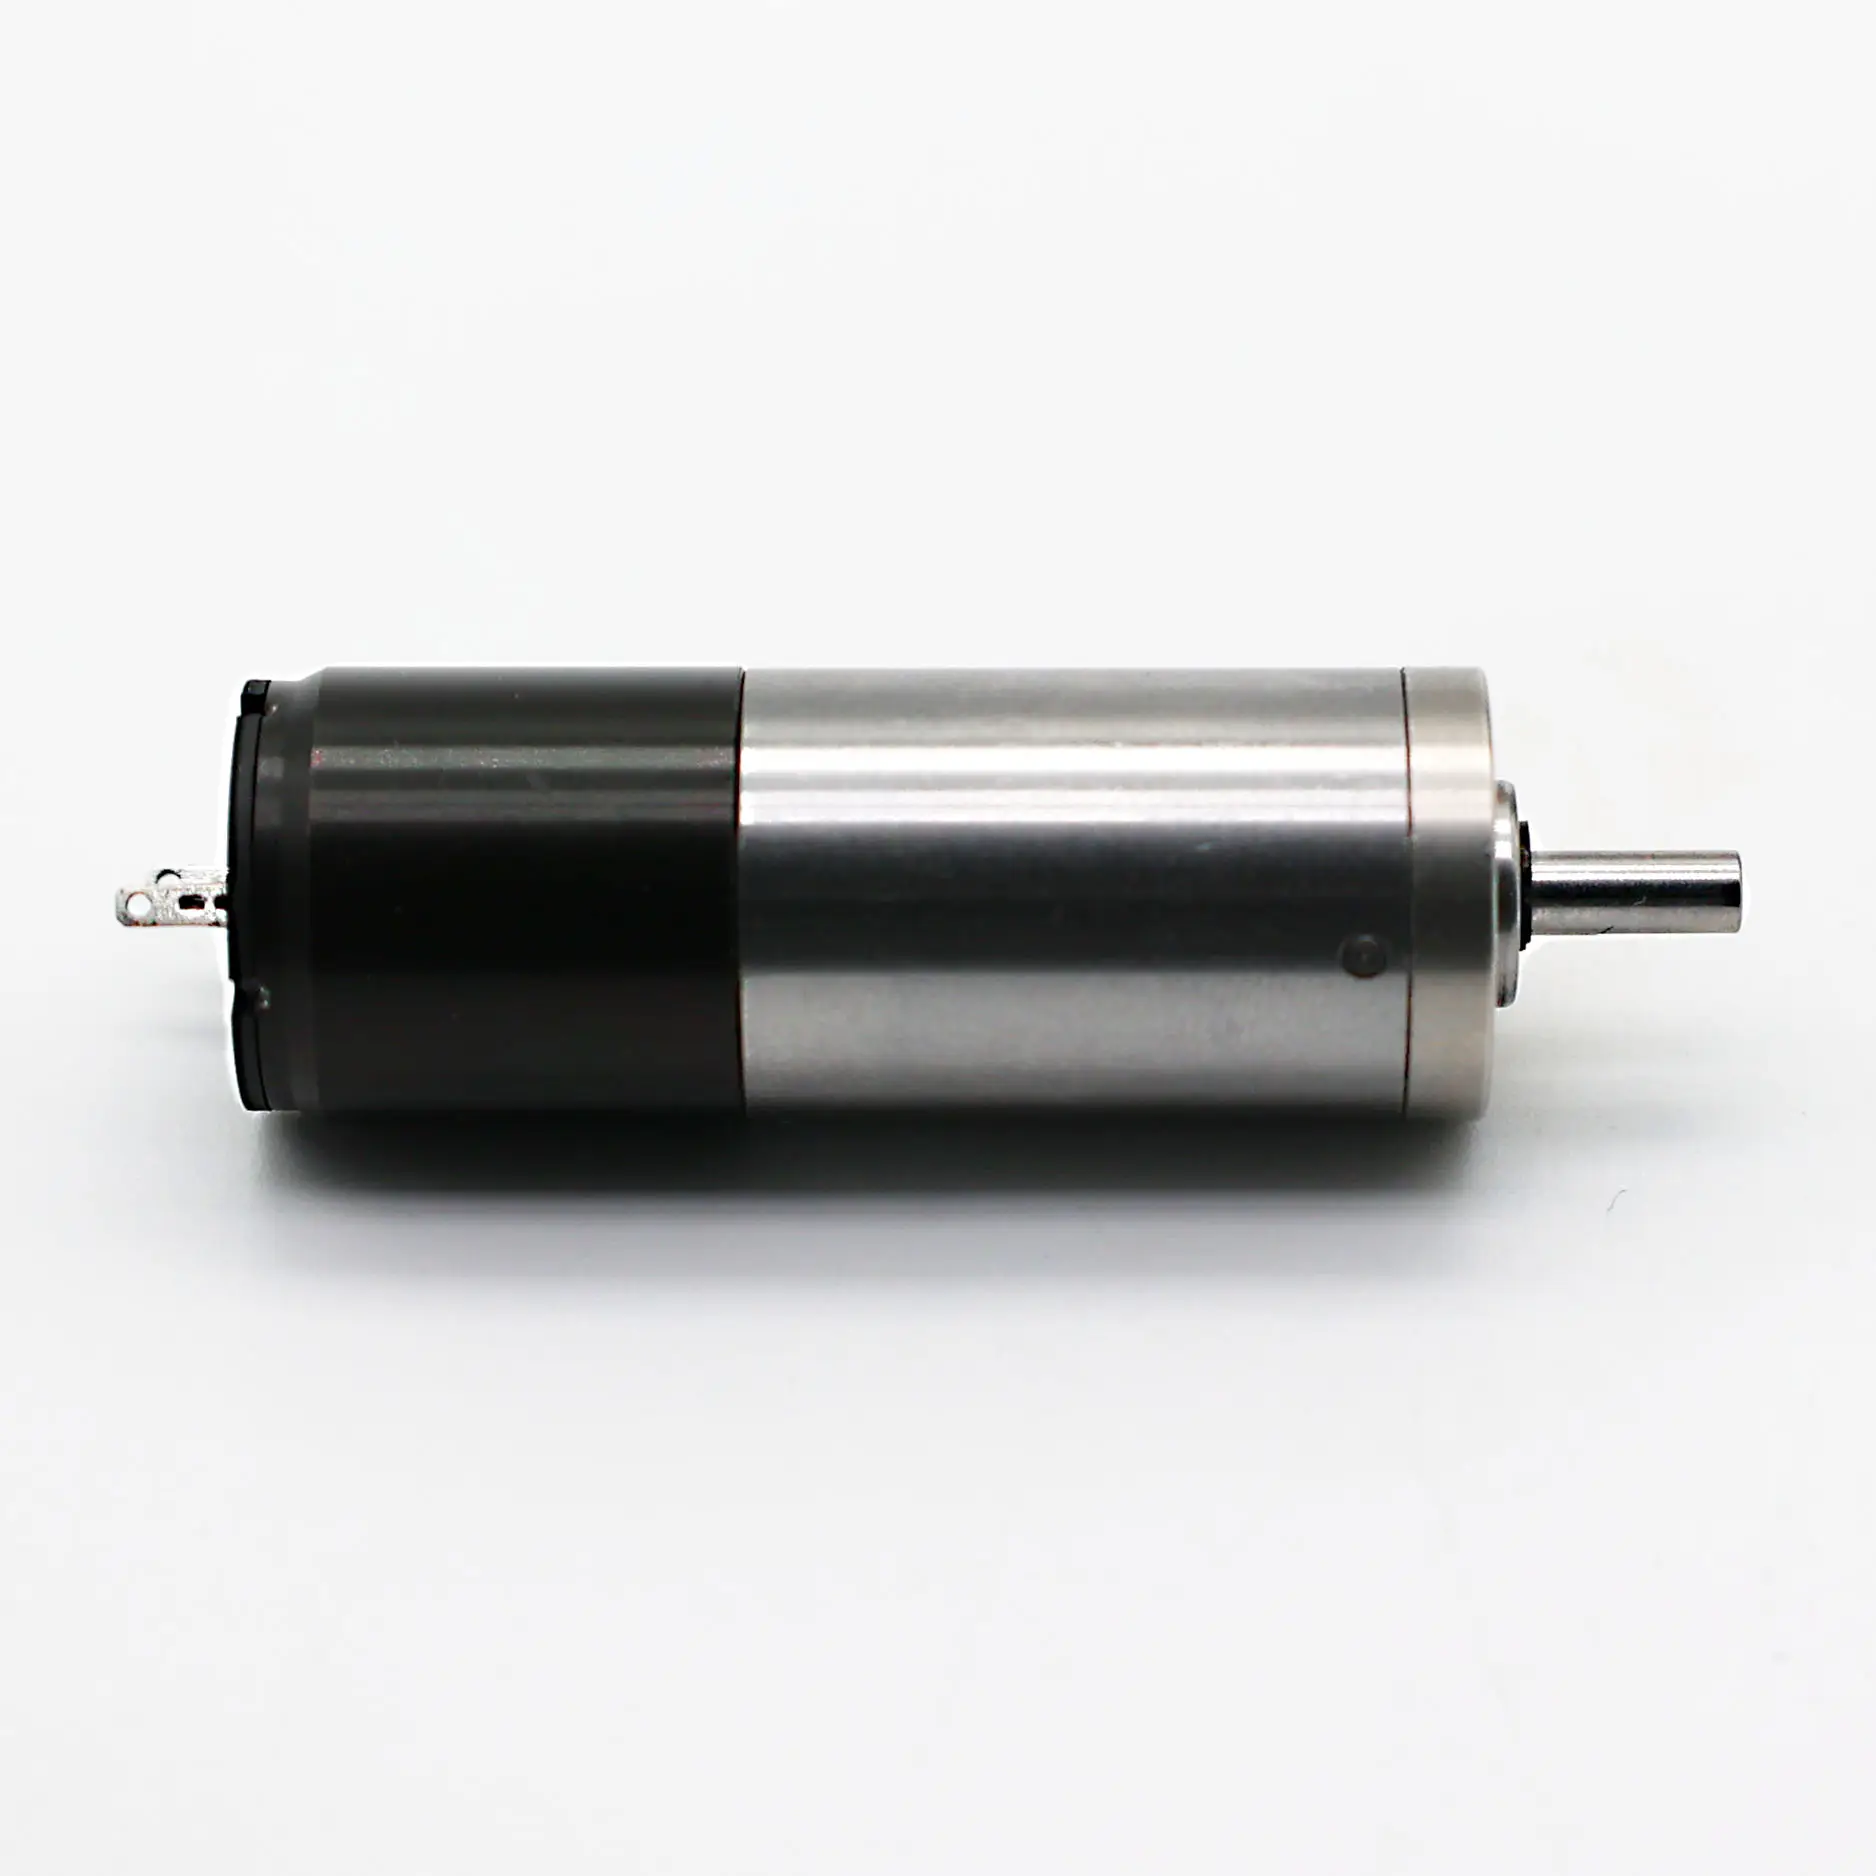 High-Torque 12V Brushed Coreless Motor with High Precise Planetary Gearbox 20mm Diameter CW/CCW Rotation for Robot Applications